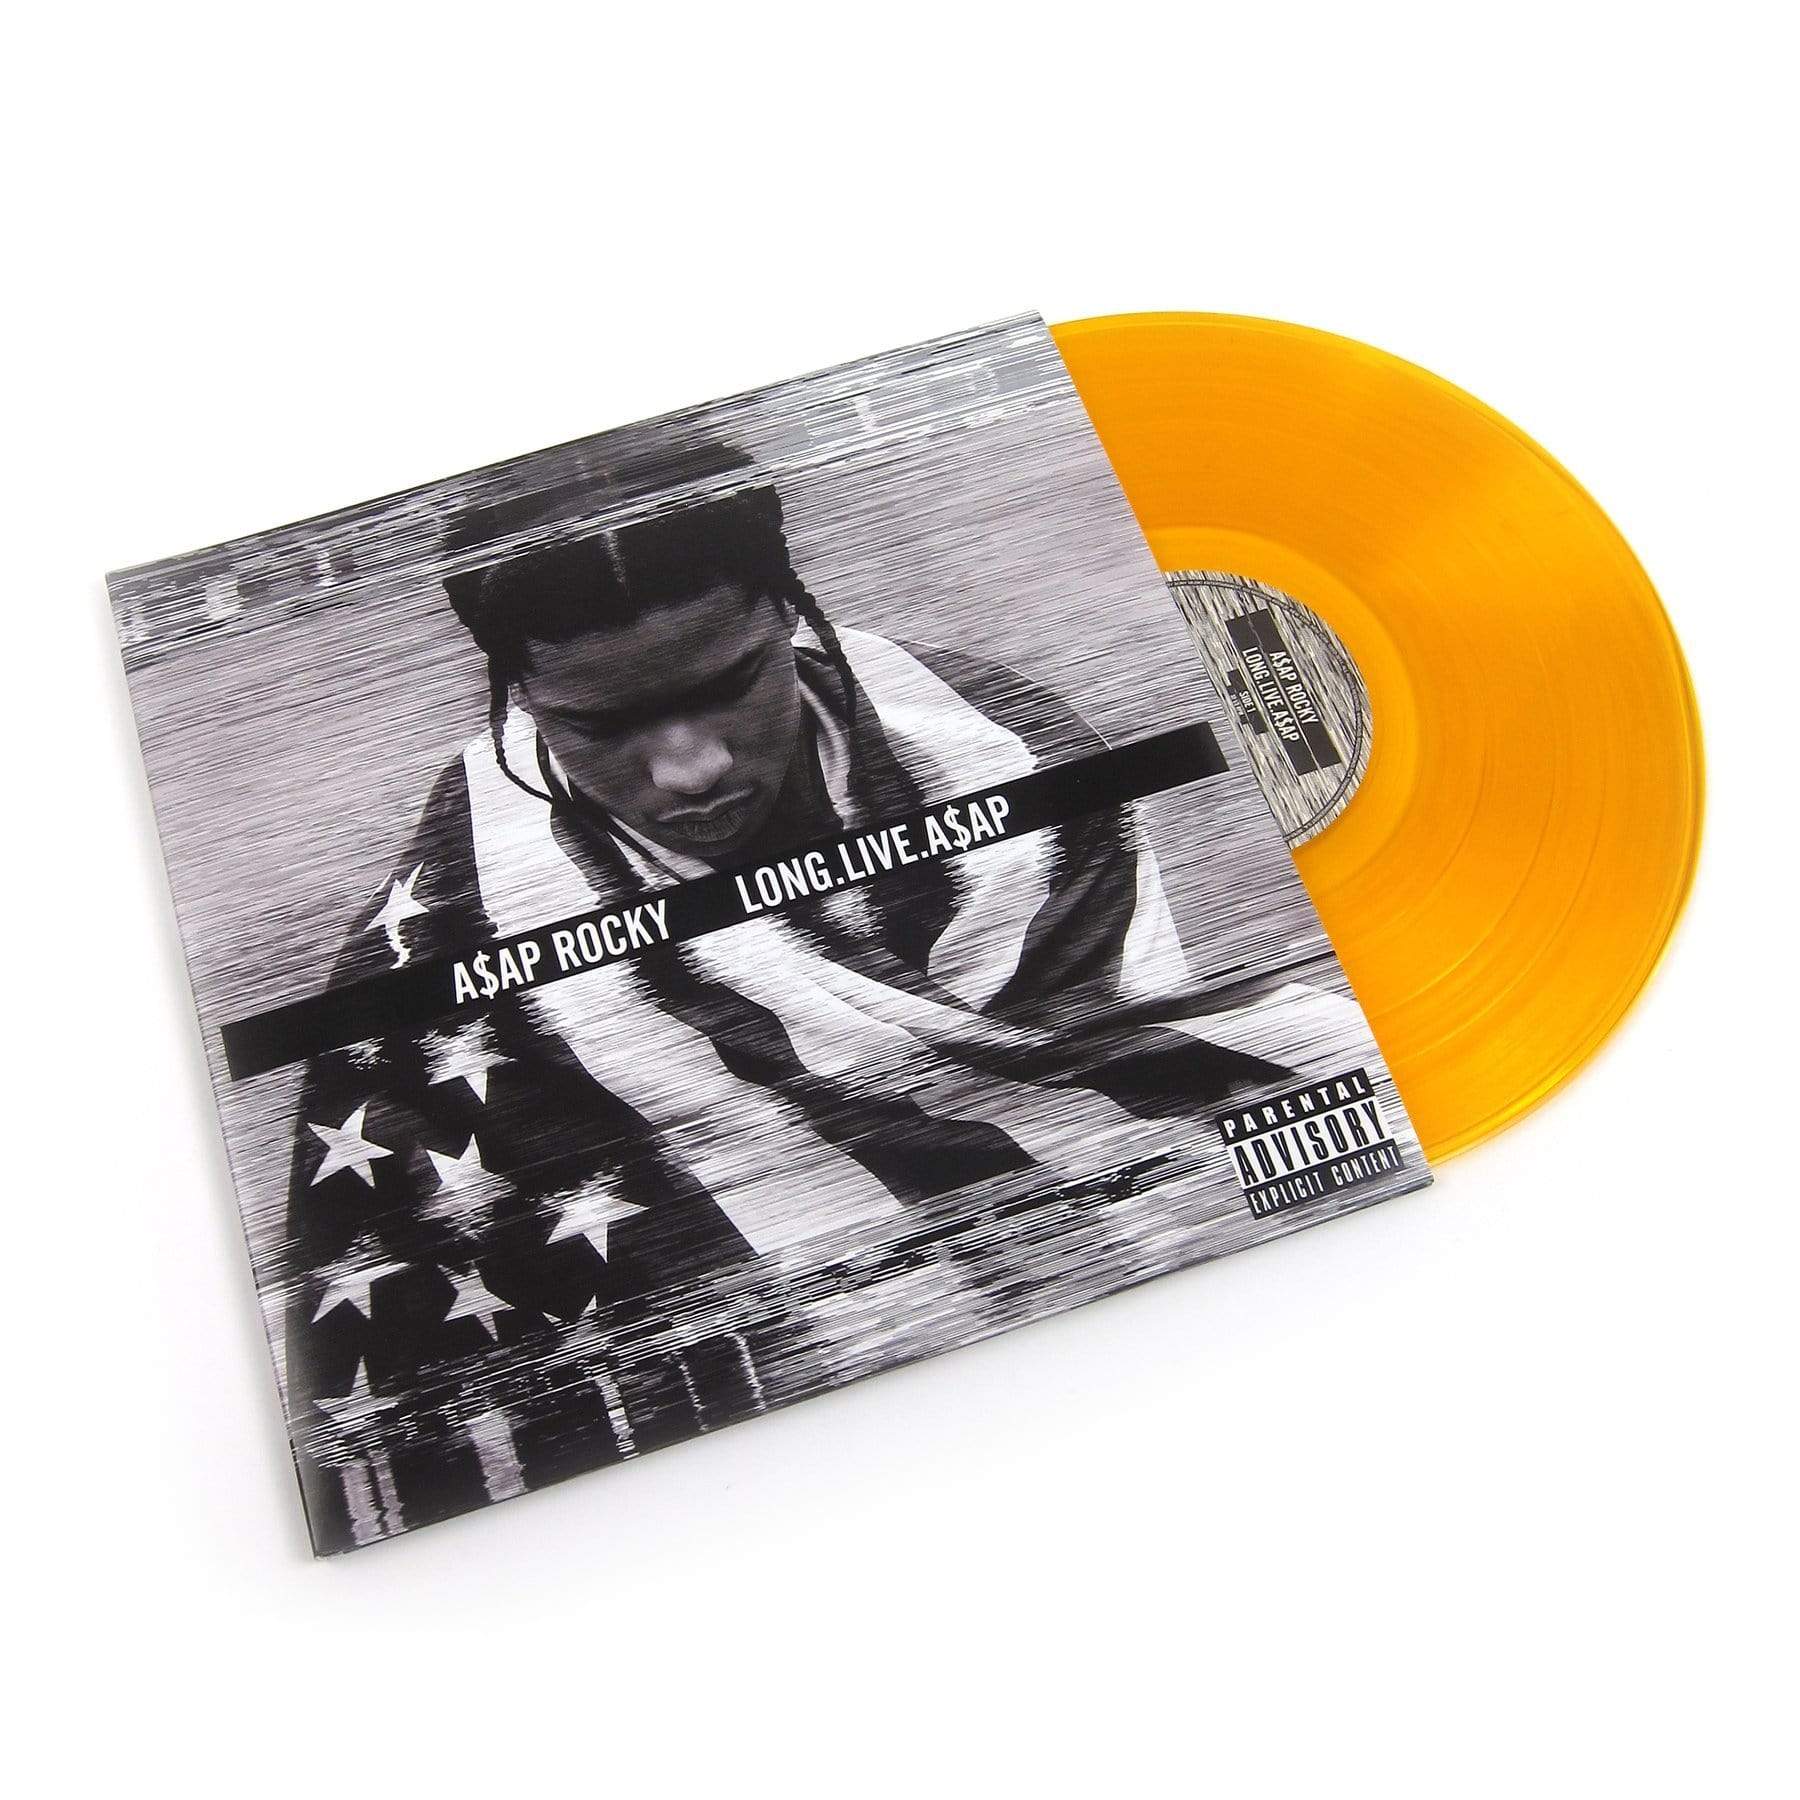 A$AP Rocky - Long.Live.A$AP (Limited Deluxe Edition Vinyl)